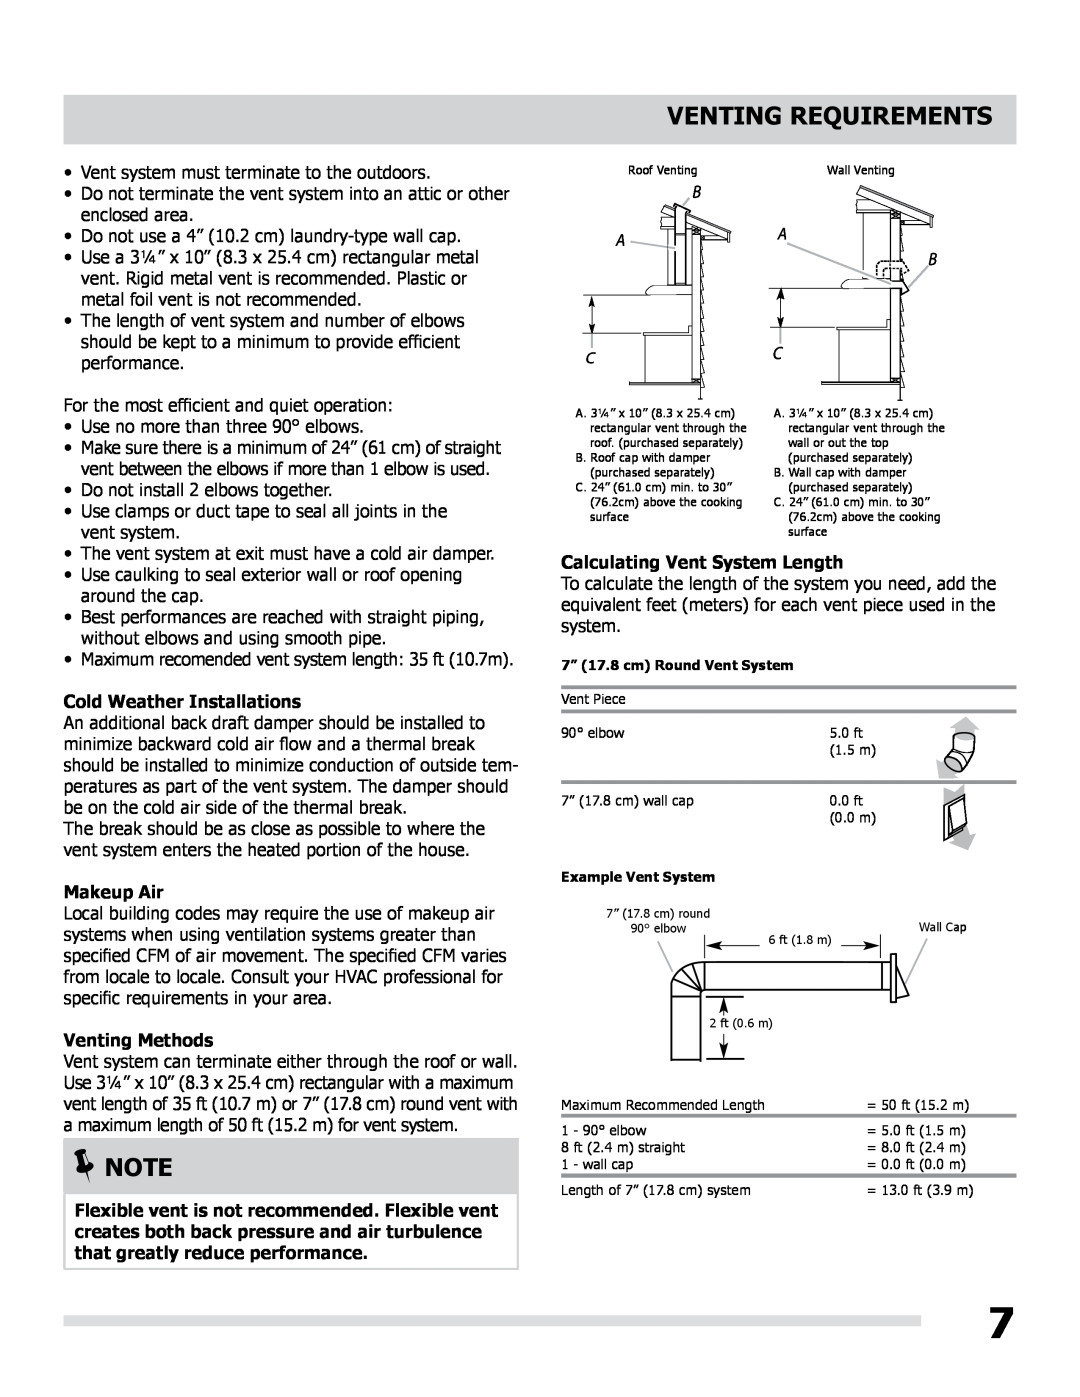 Frigidaire LI30KC/316902495 manual Venting Requirements, Cold Weather Installations, Makeup Air, Venting Methods, A B C 